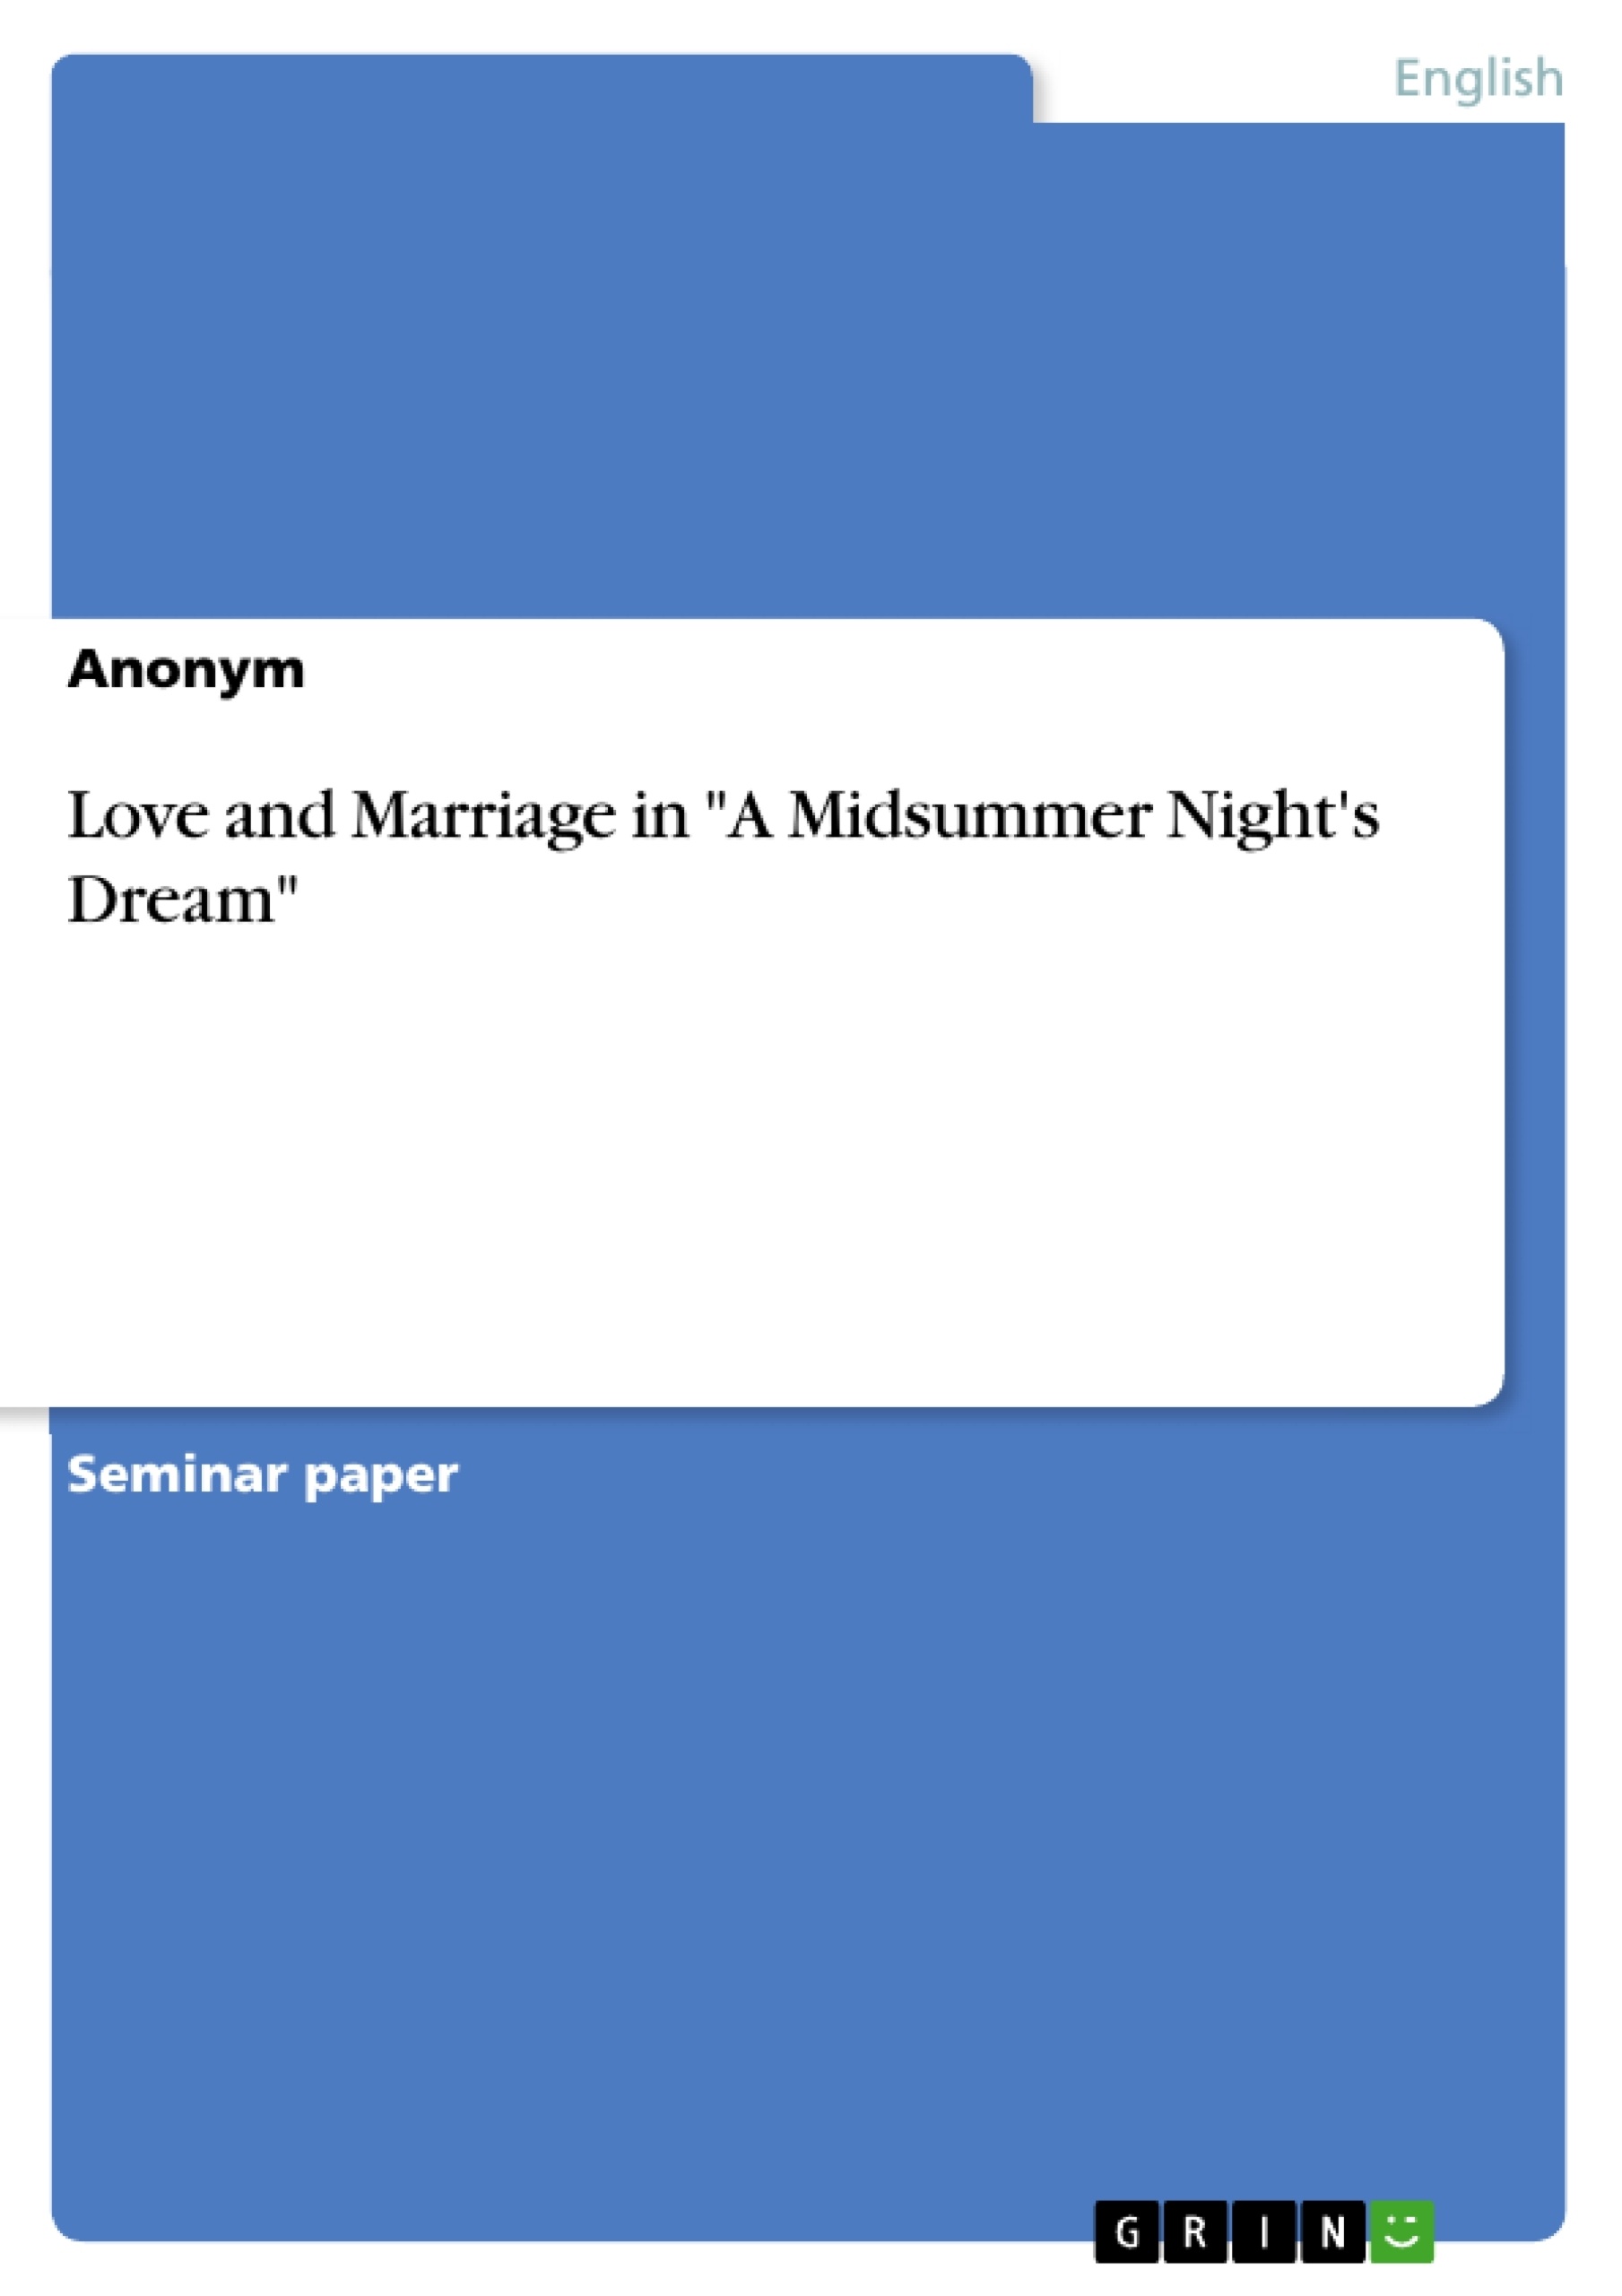 Introduction to A Midsummer Night's Dream